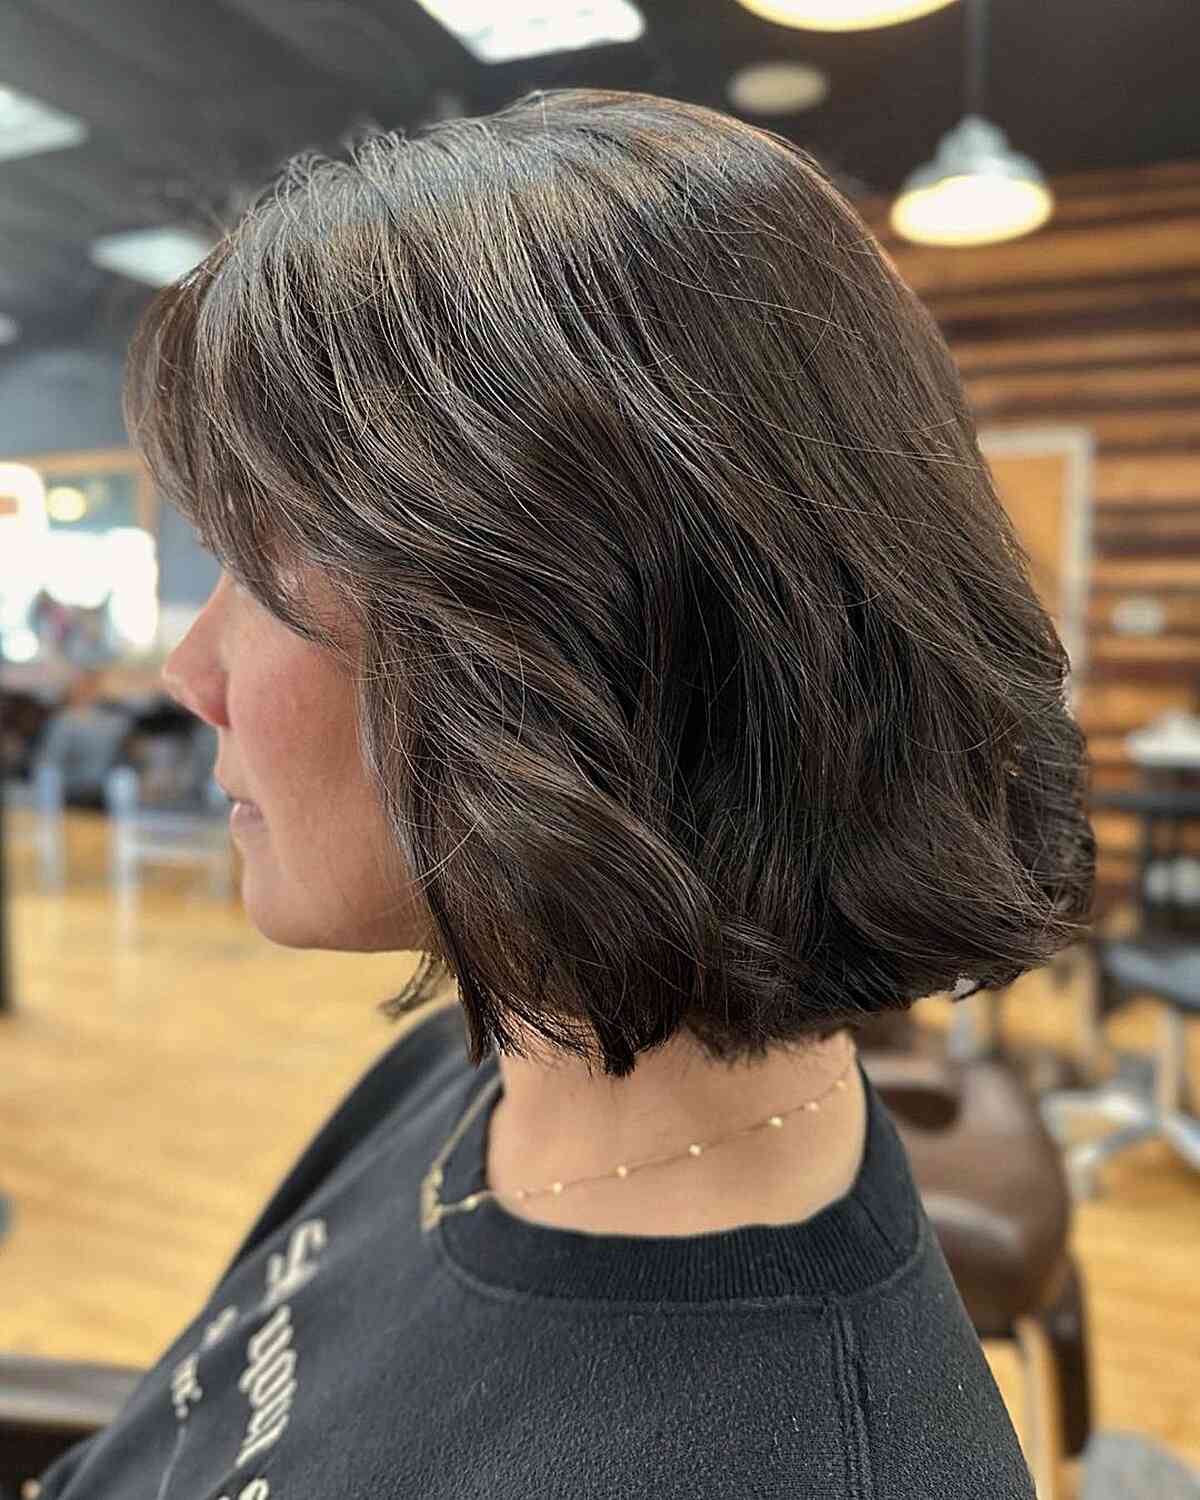 Medium Italian Bobbed Cut with Soft Fringe for Thick Hair